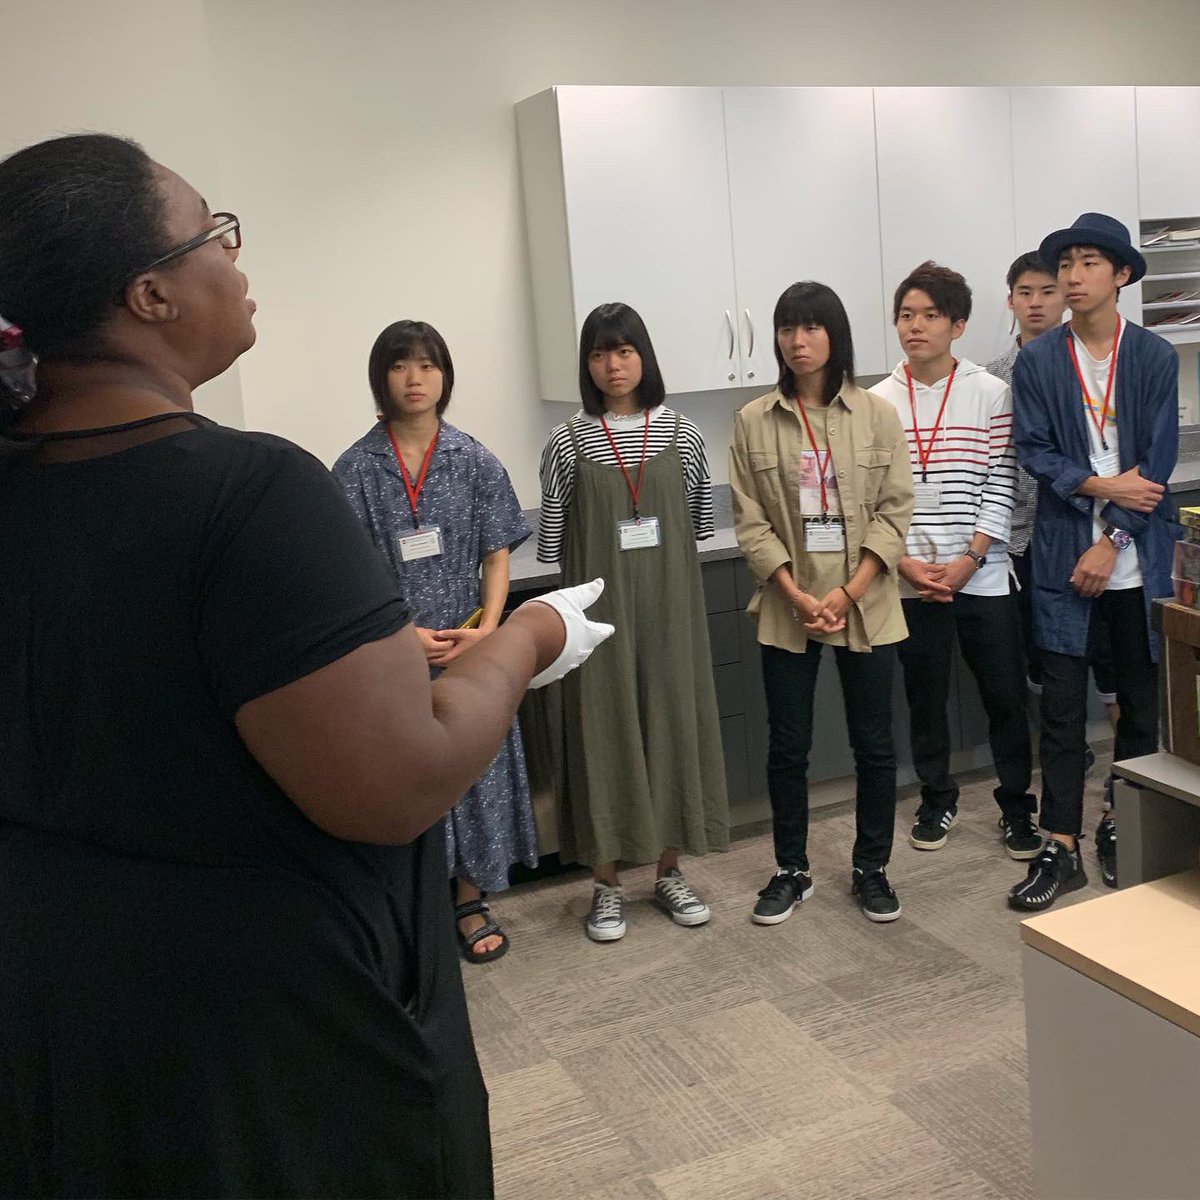 BICLM is a resource for students near and far! Just today we taught a class from Suzuka College in Japan, as well as a Yiddish Studies course from Ohio State. Thanks for visiting! #landgrantuniversity